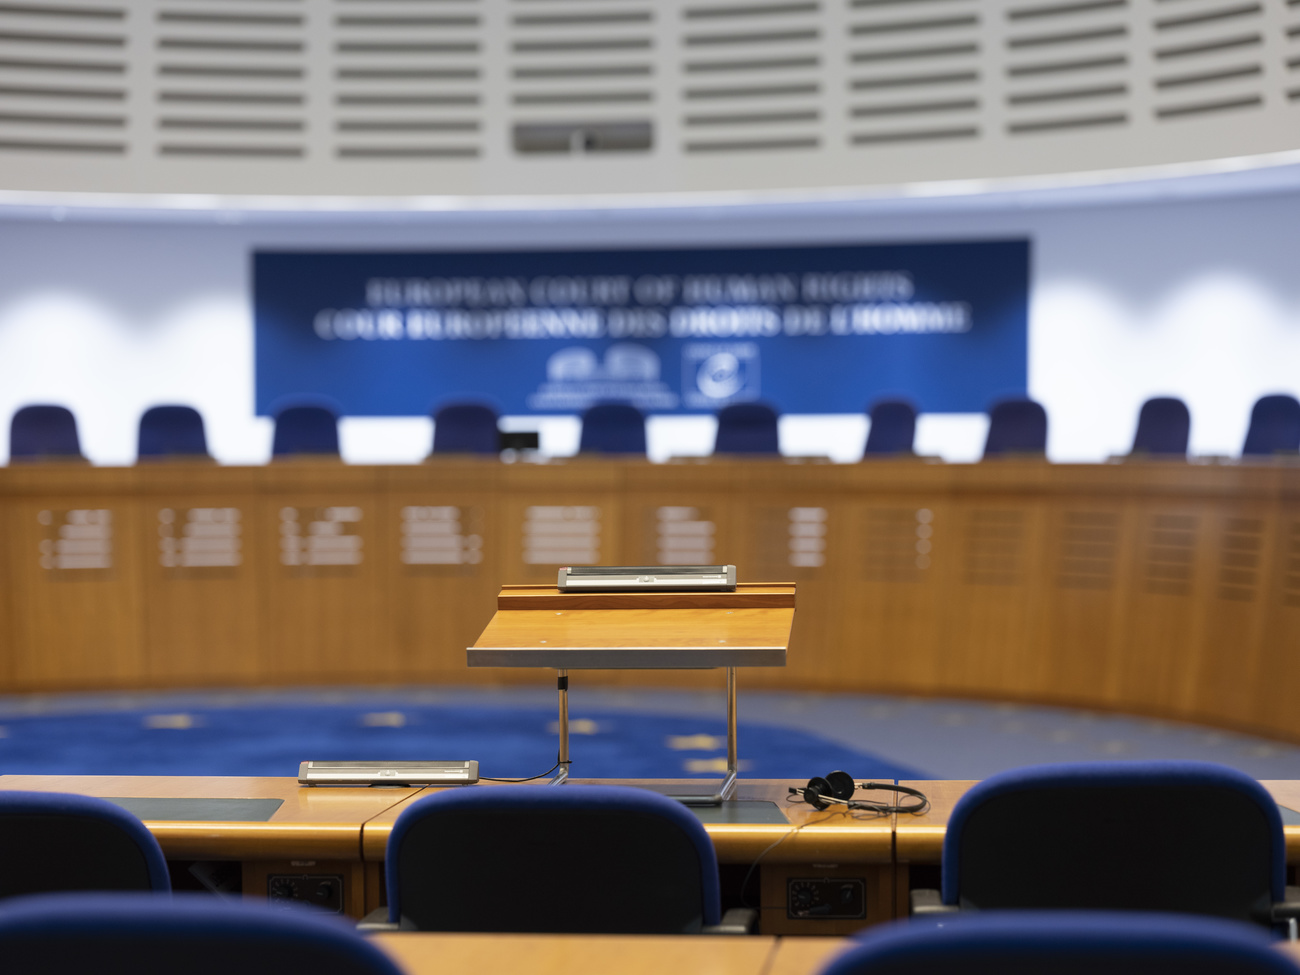 A speaker's desk in the Grand Chamber of the European Court of Human Rights, ECHR, in Strasbourg, France, on October